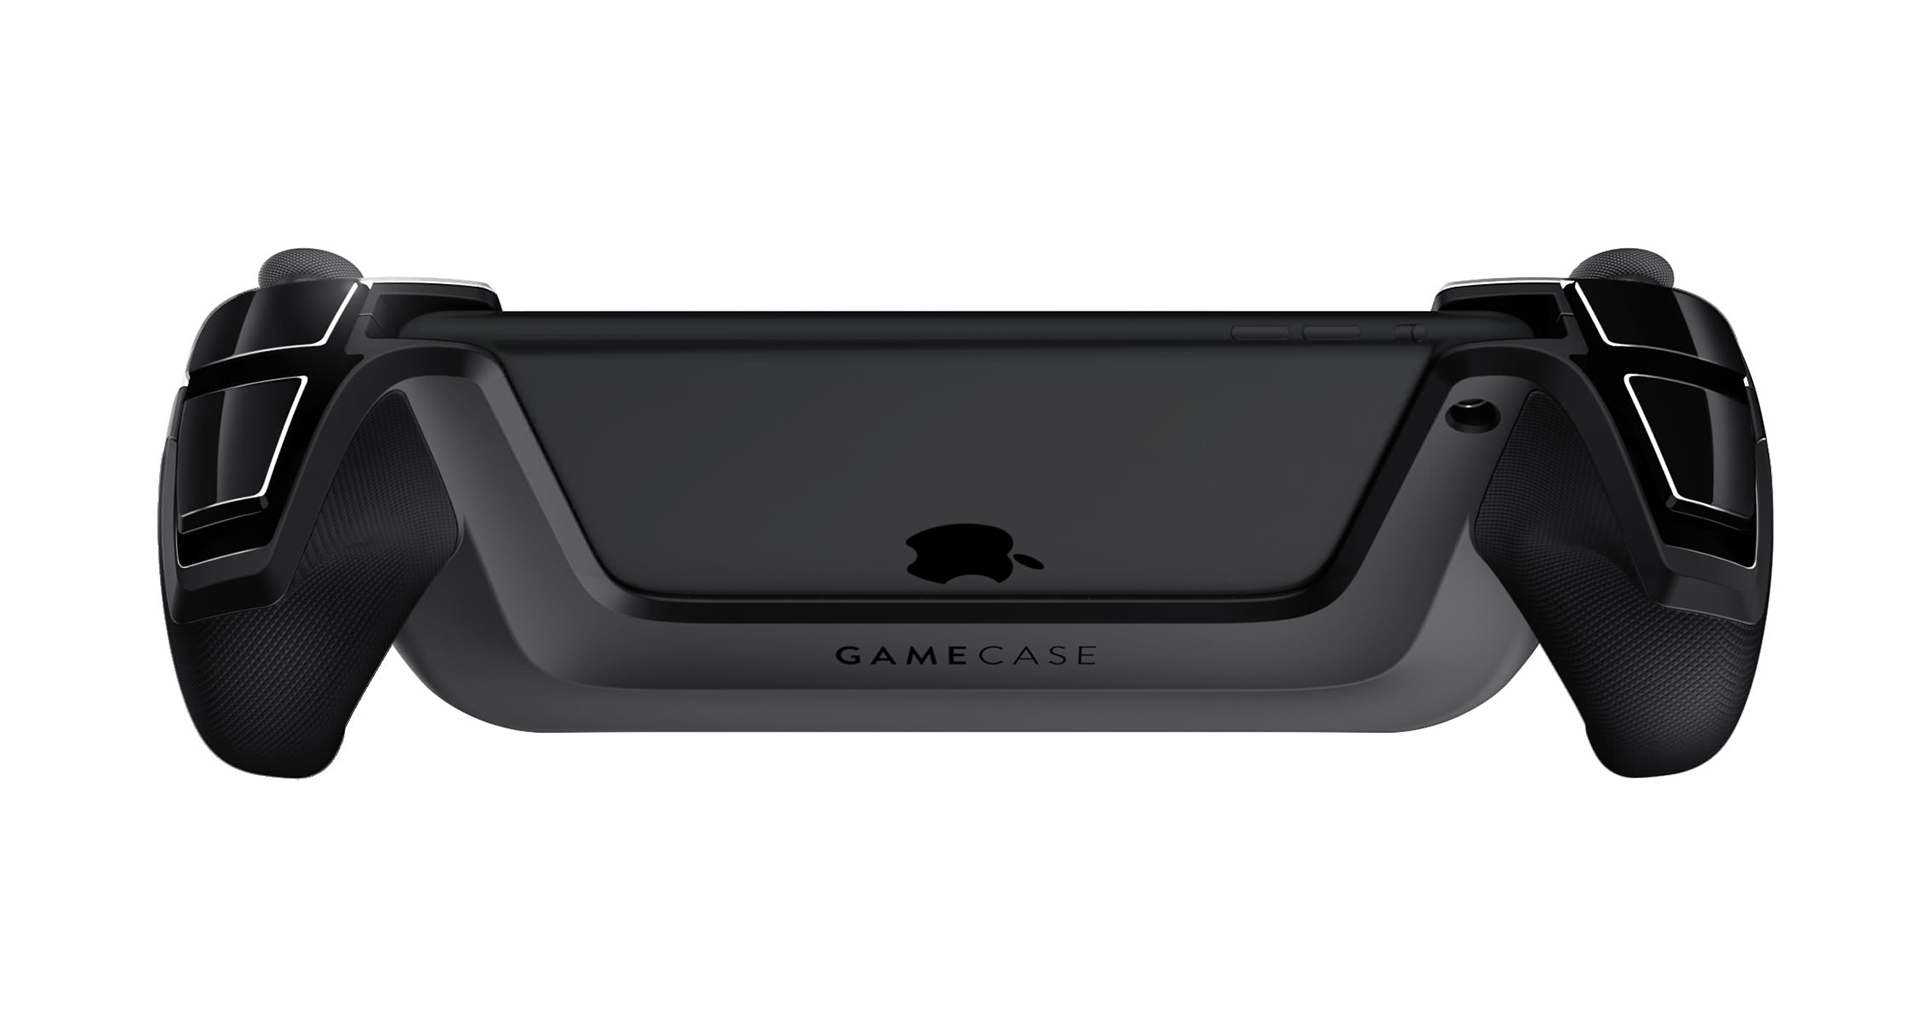 The First Announced iOS 7 Gamepad Looks… Interesting